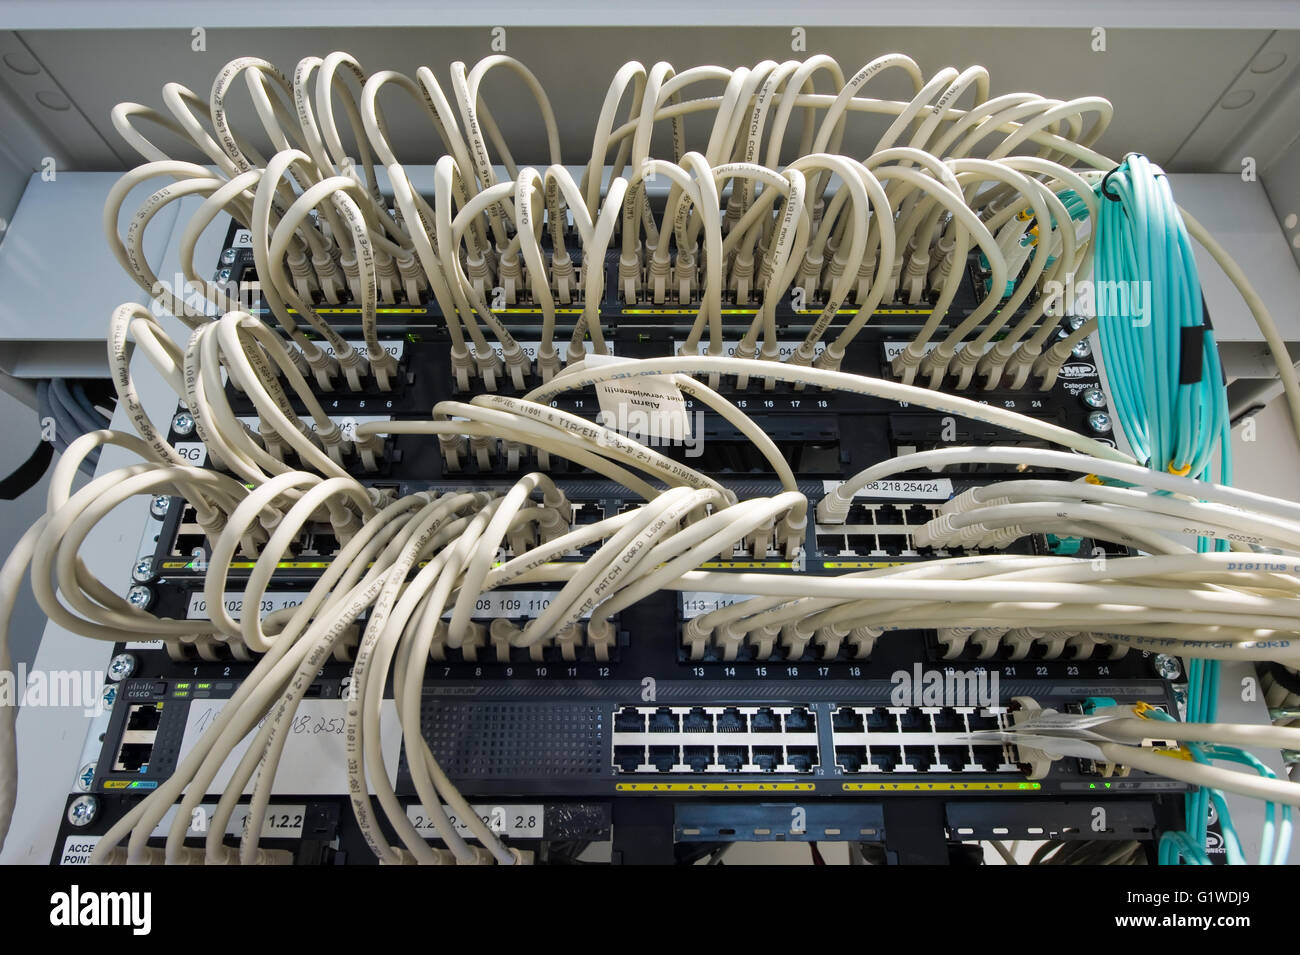 Lots of cables on the back of a database Stock Photo